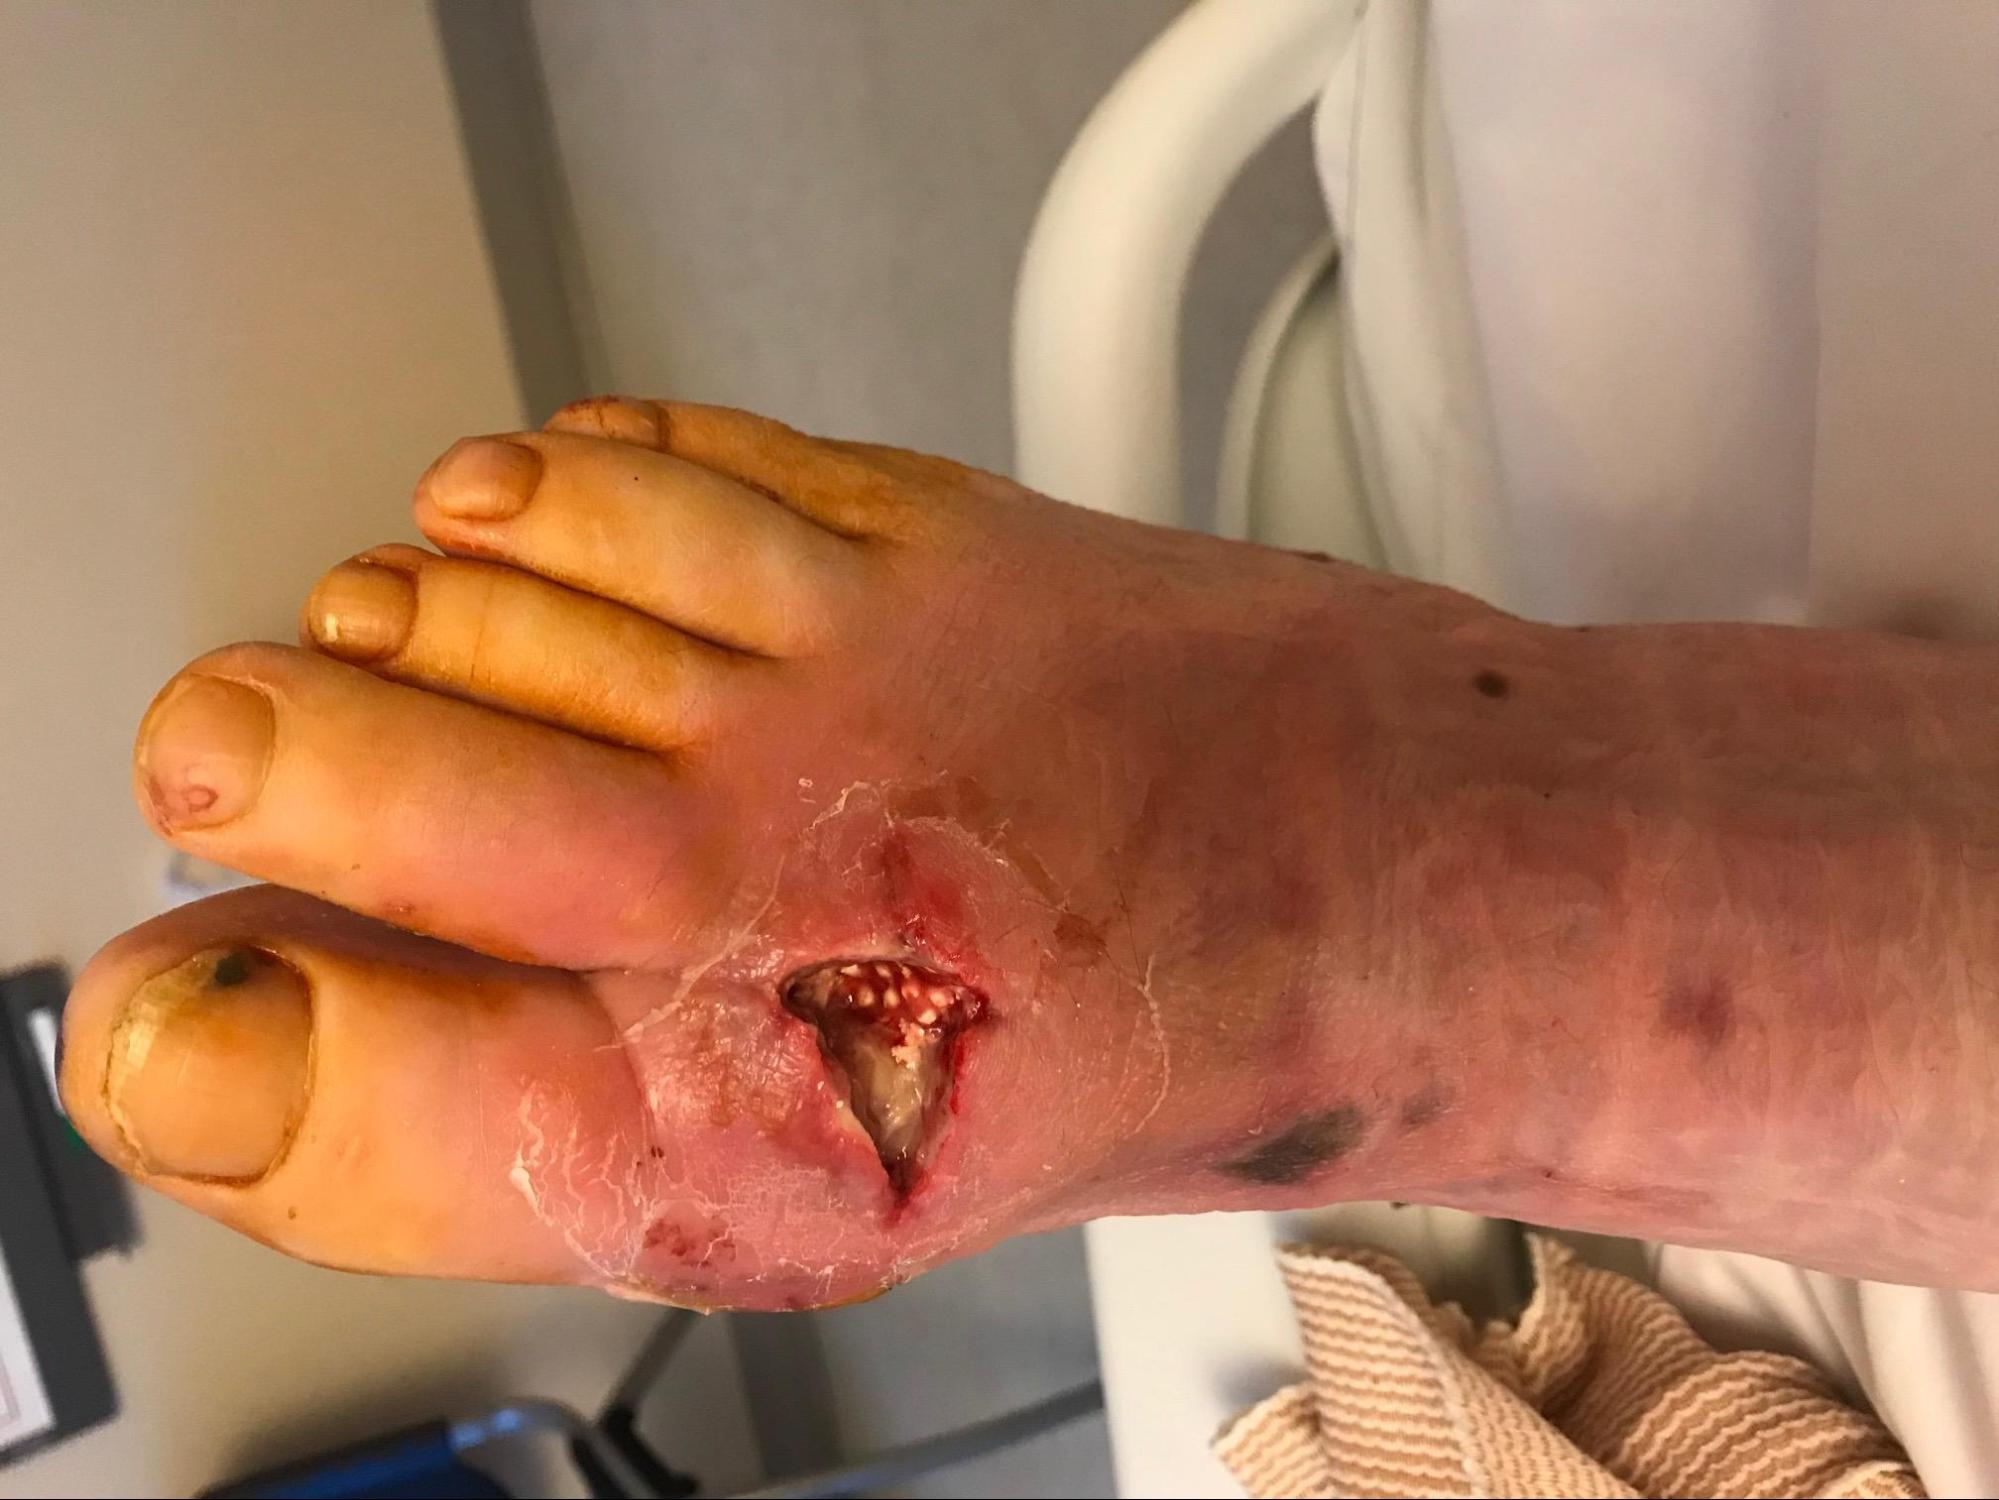 Diabetic Foot Infection
Status post incision and drainage with insertion and antibiotic beads. 